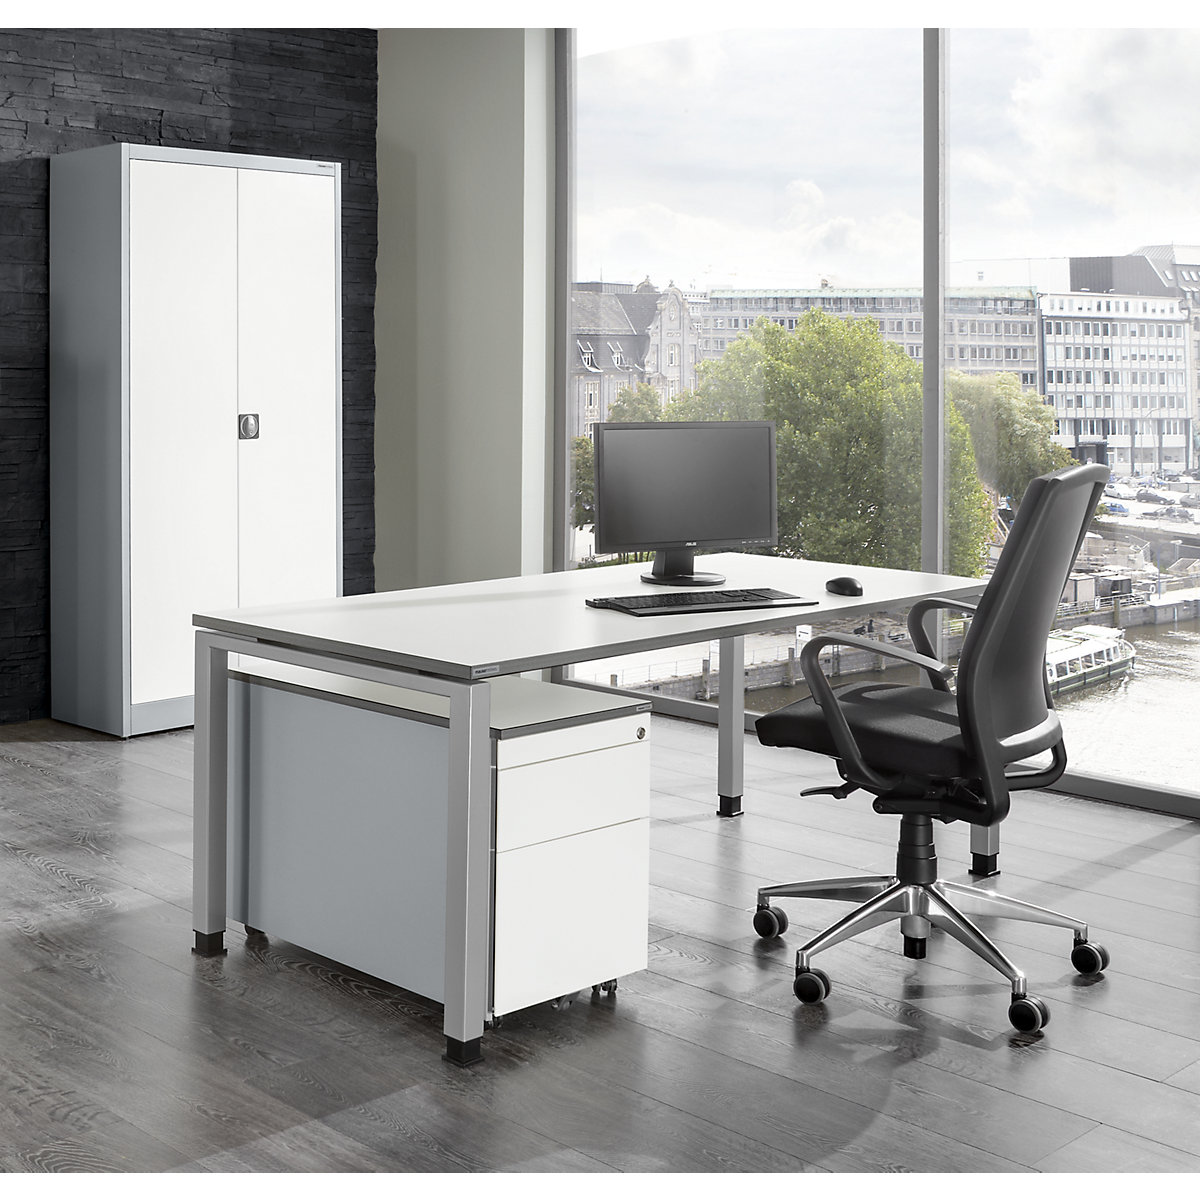 mauser – ARCOS complete office, desk, hinged door cupboard, mobile drawer unit with suspension file drawer, white aluminium / pure white